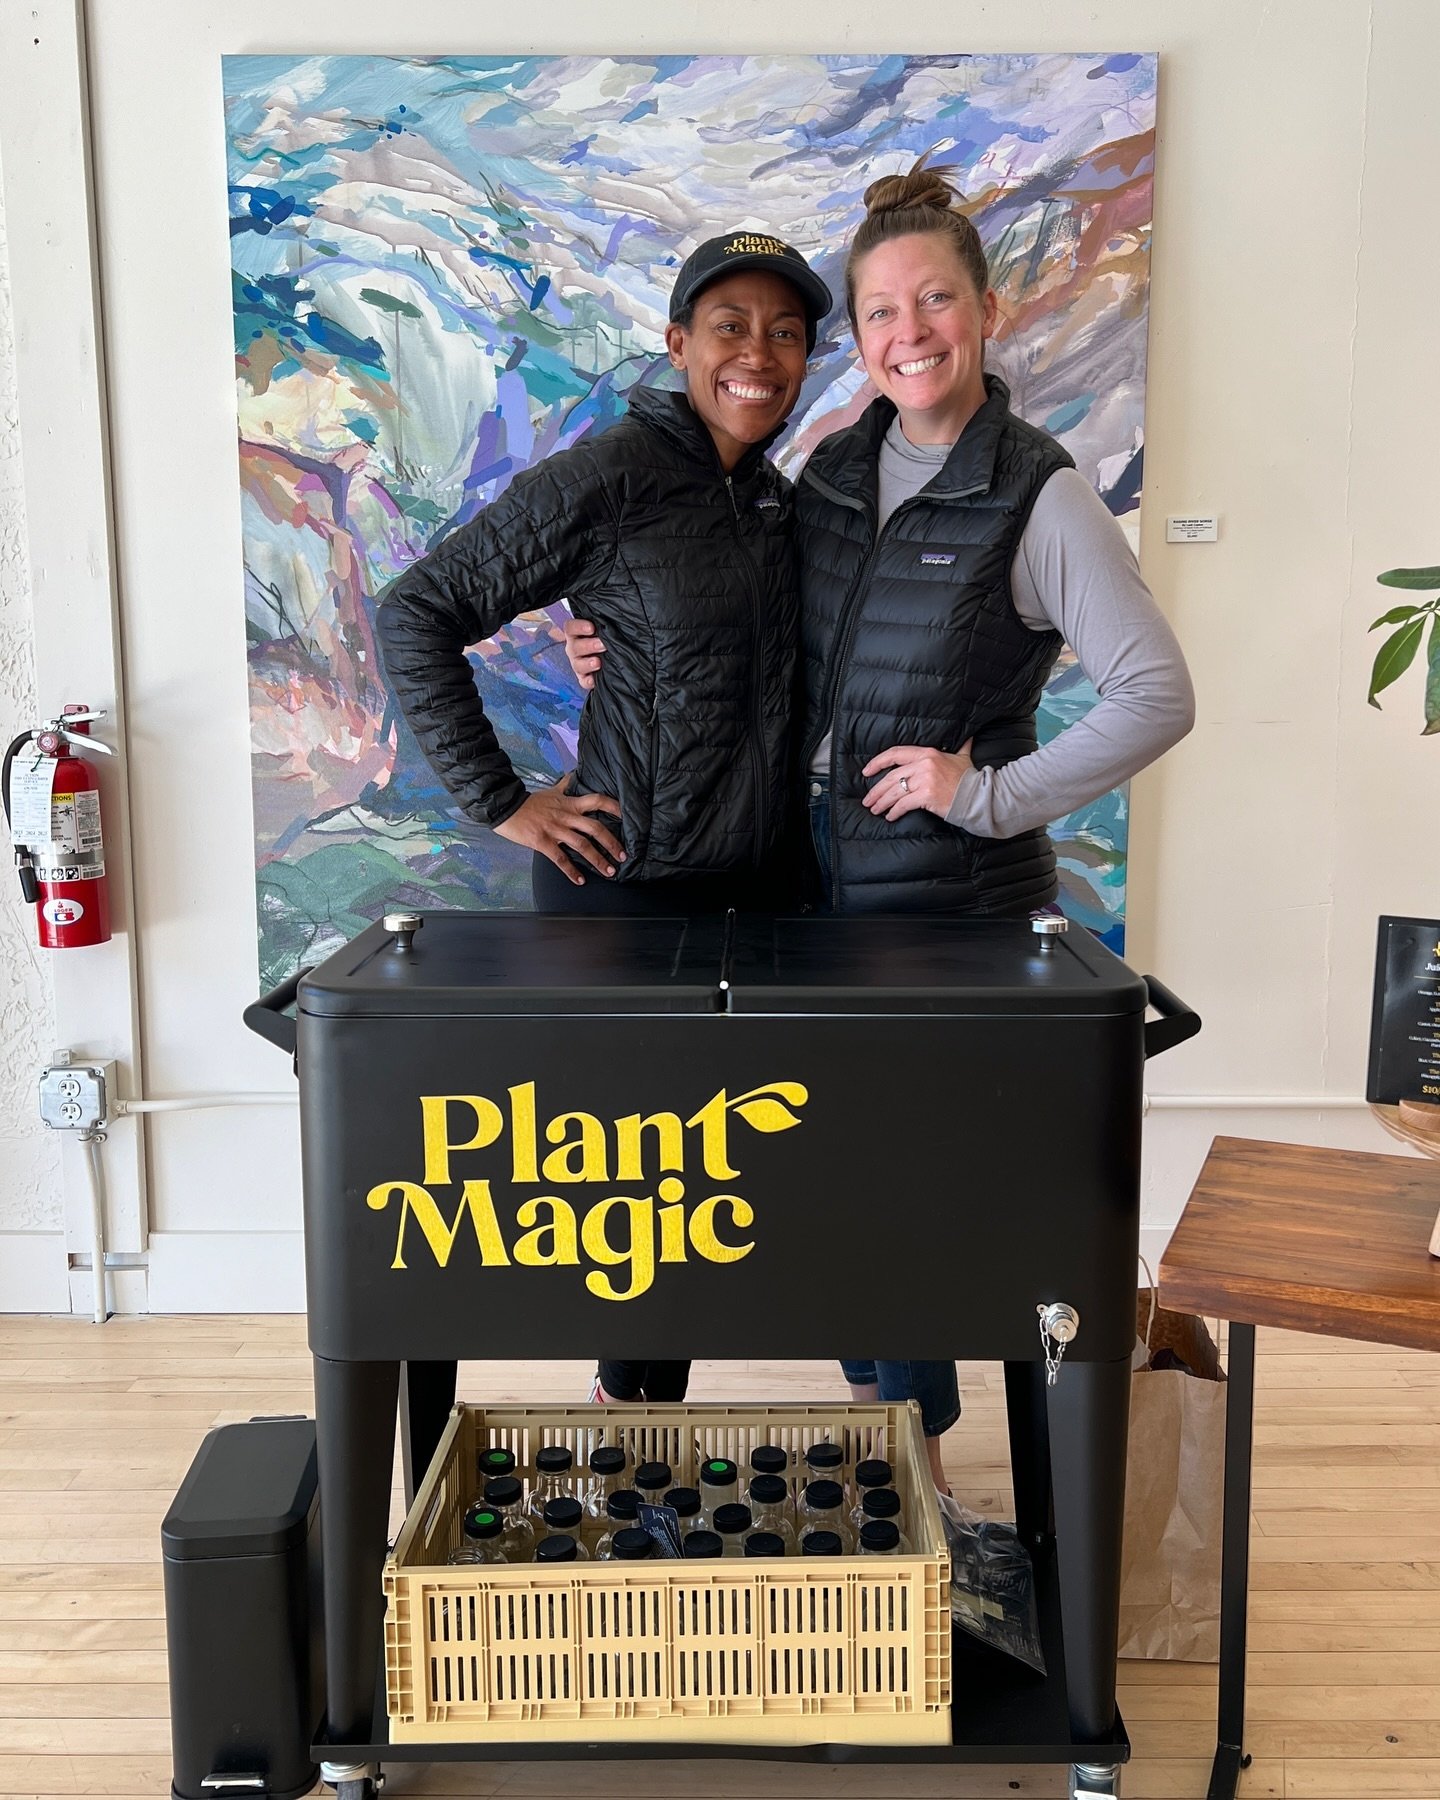 Join us this Friday, May 10th at Helena Home Team for the Spring Art Walk! Plant Magic will be selling juices and sharing free samples from 4 - 6 pm (while supplies last). 

We&rsquo;ll be surrounded by a group of amazing female artists including:
▫️